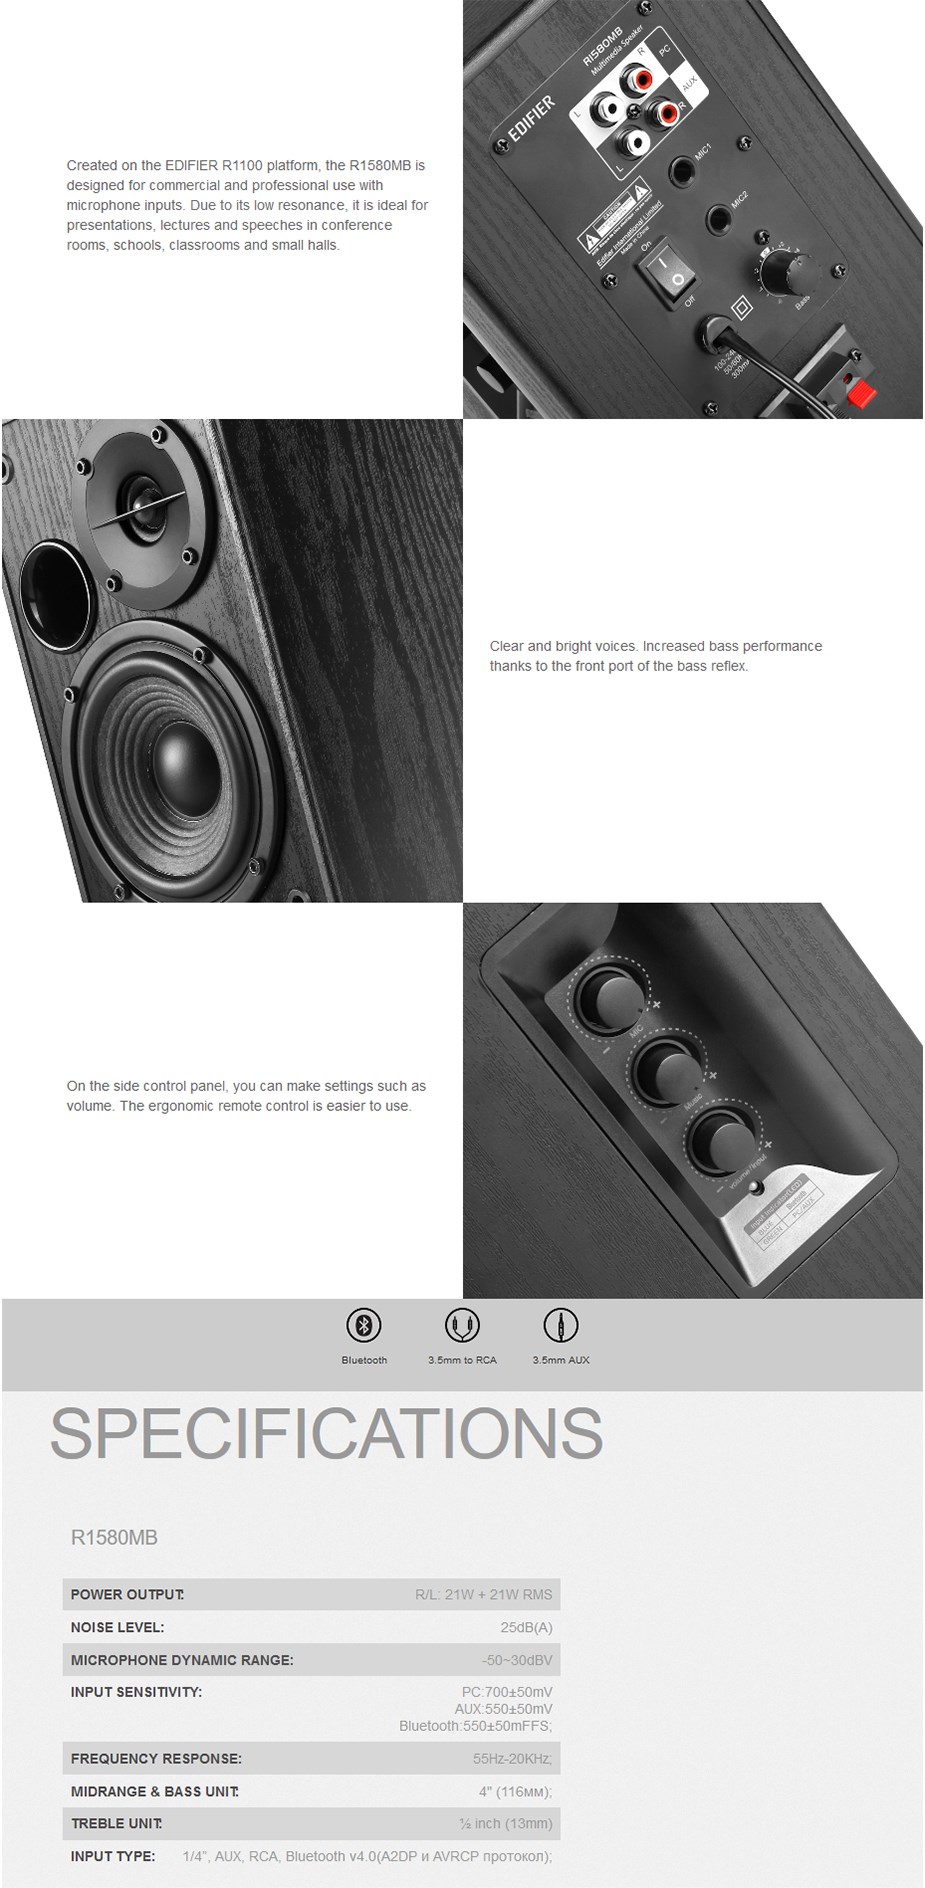 Edifier R1580MB Active 2.0 Speaker System - Overview Image 1